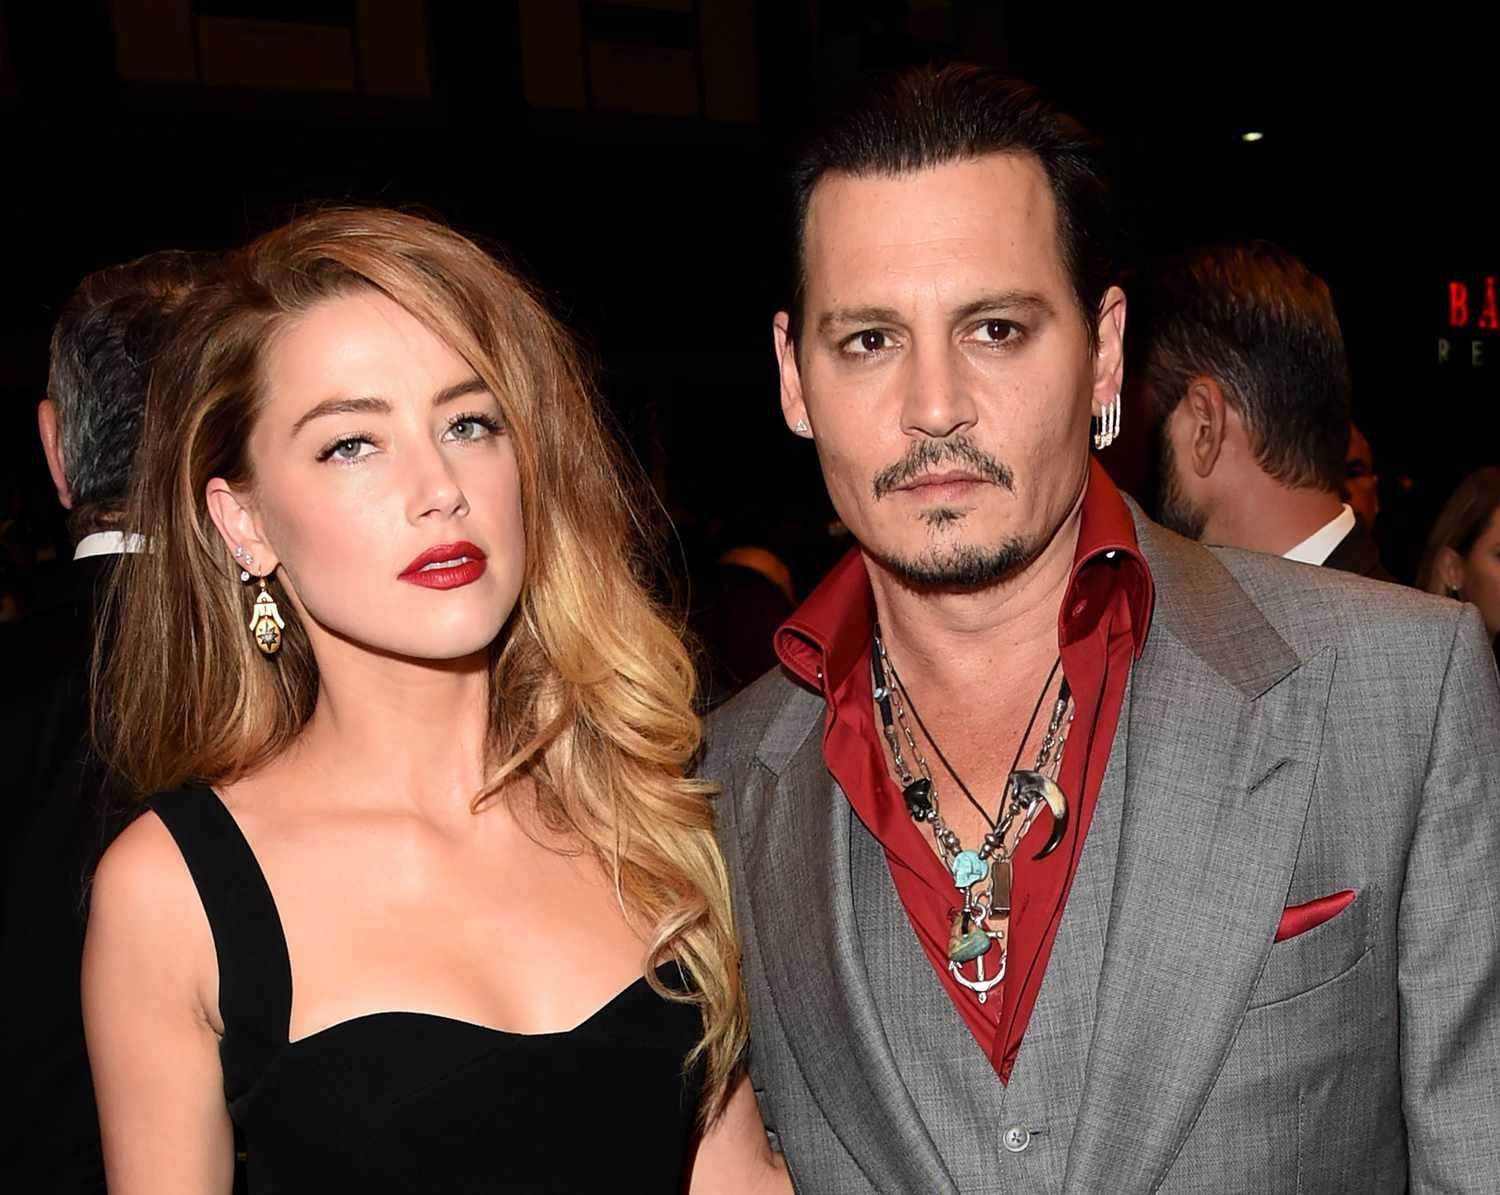 Johnny Depp: A hollywood icon's fall and the social media verdict